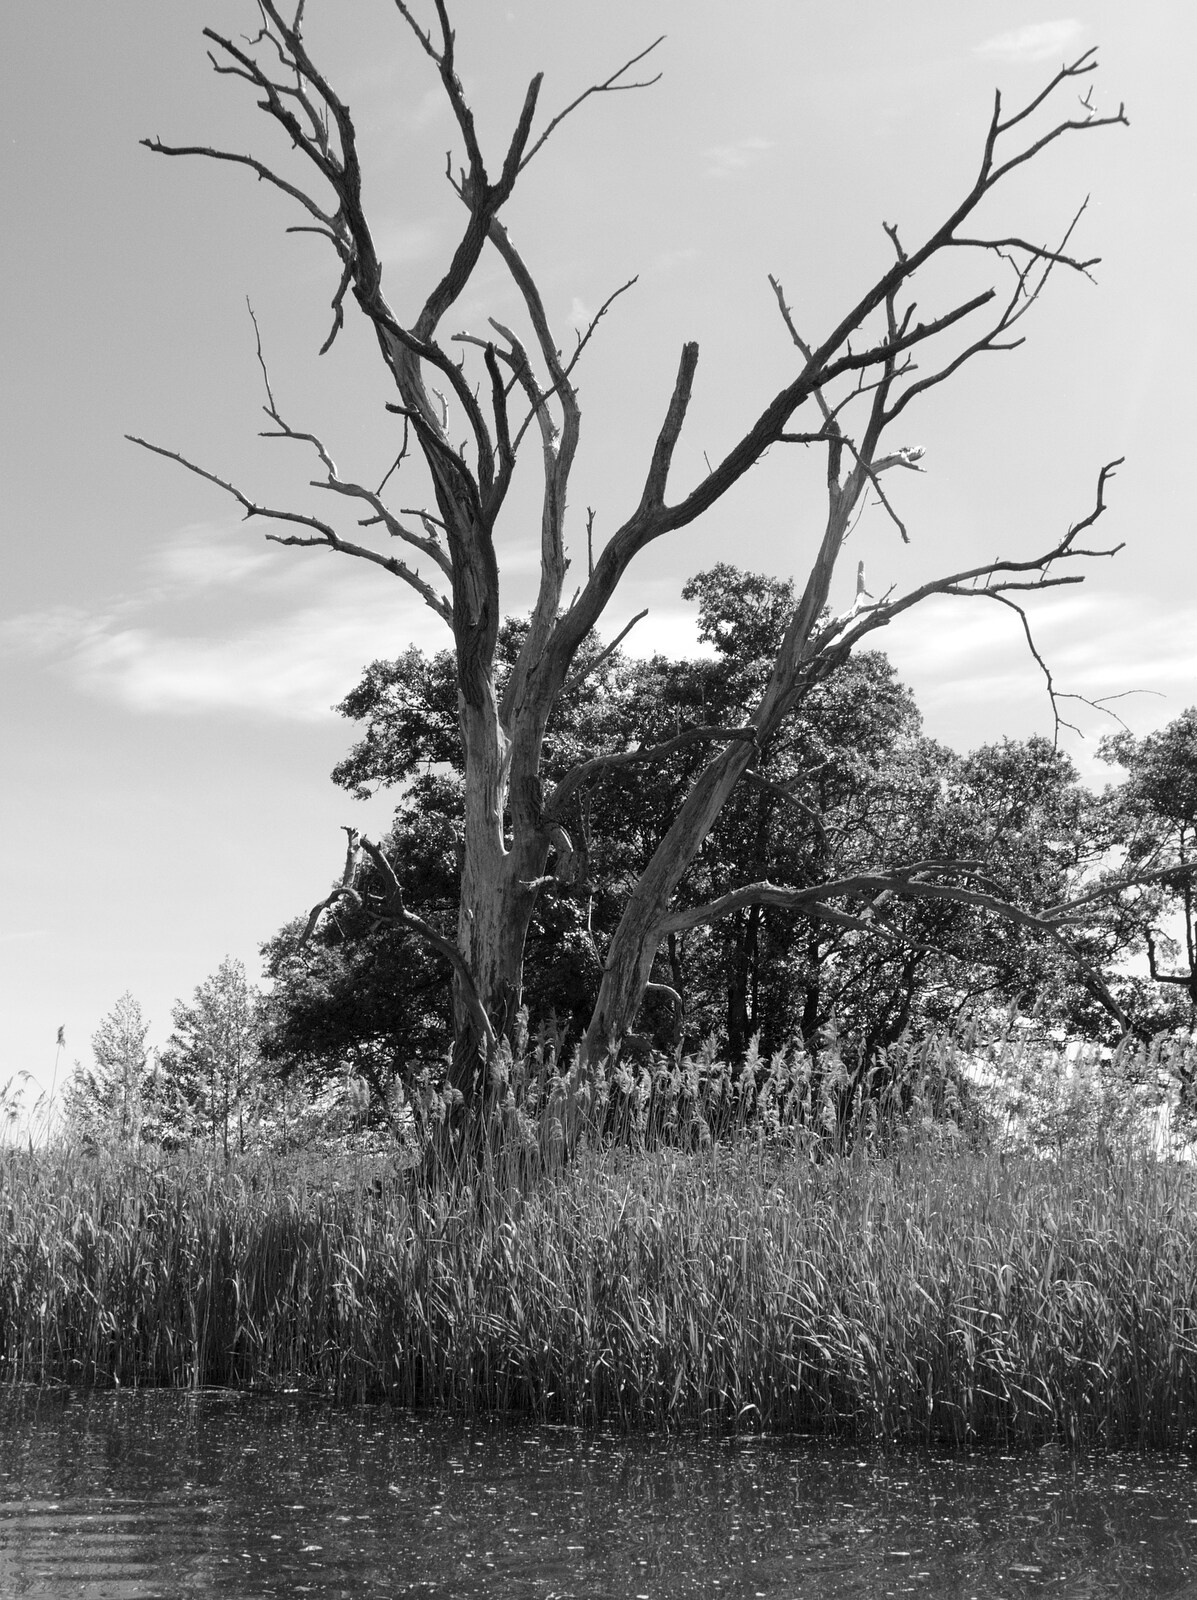 A dead tree by the river from Camping at Three Rivers, Geldeston, Norfolk - 1st June 2019